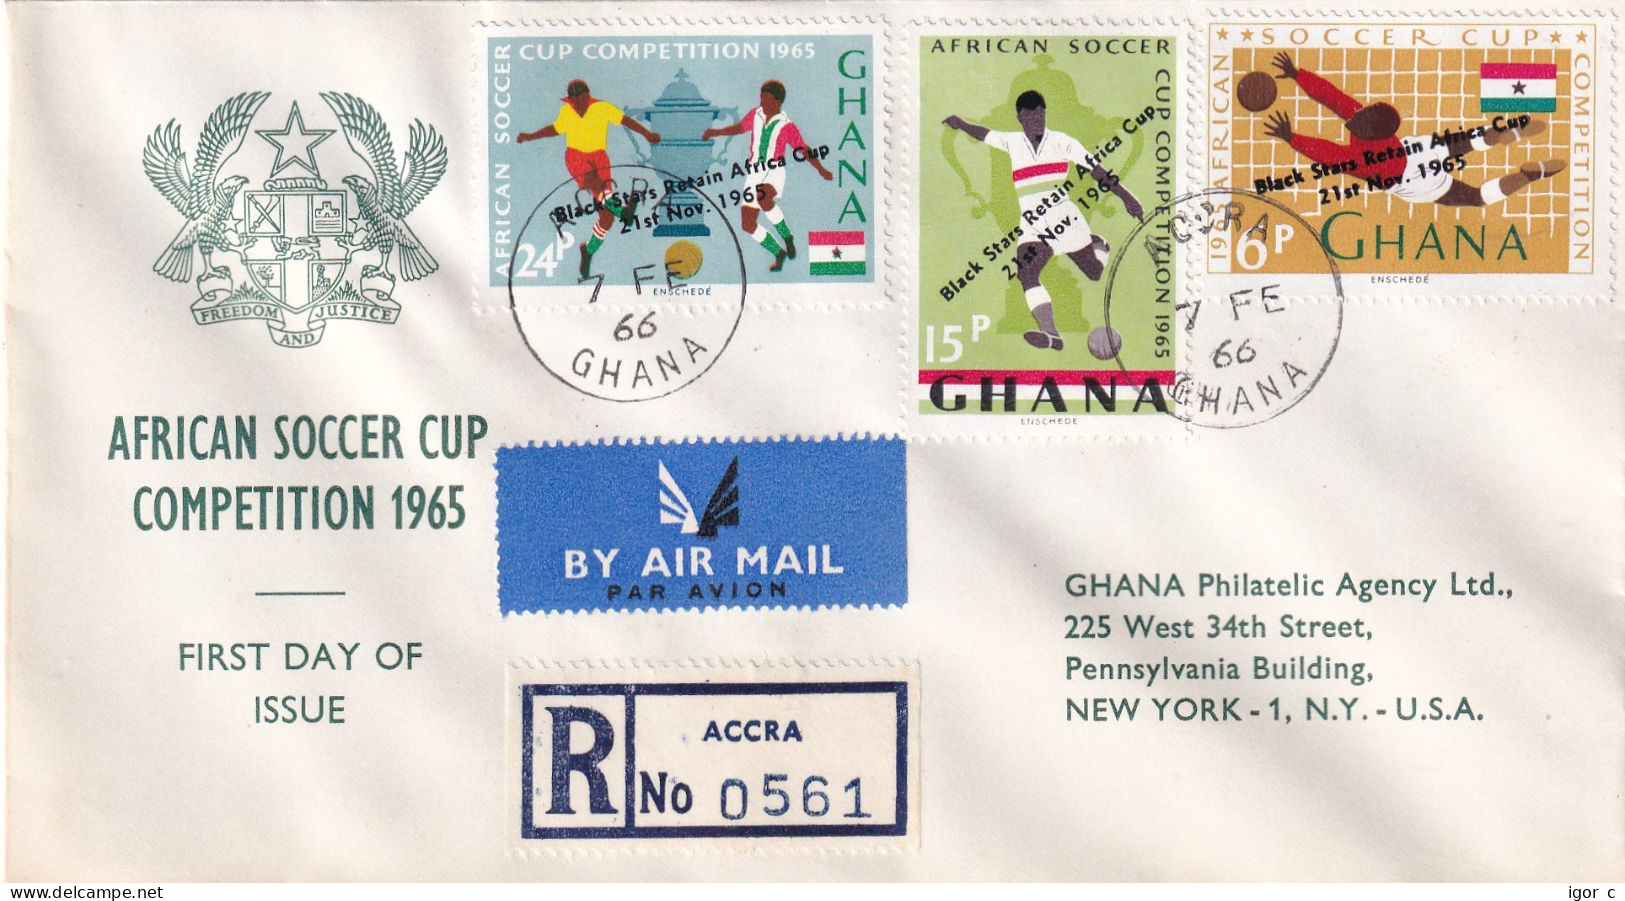 Ghana 1965 Registered Air Mail Cover; Football Fussball Calcio Soccer; Africa Cup - Africa Cup Of Nations